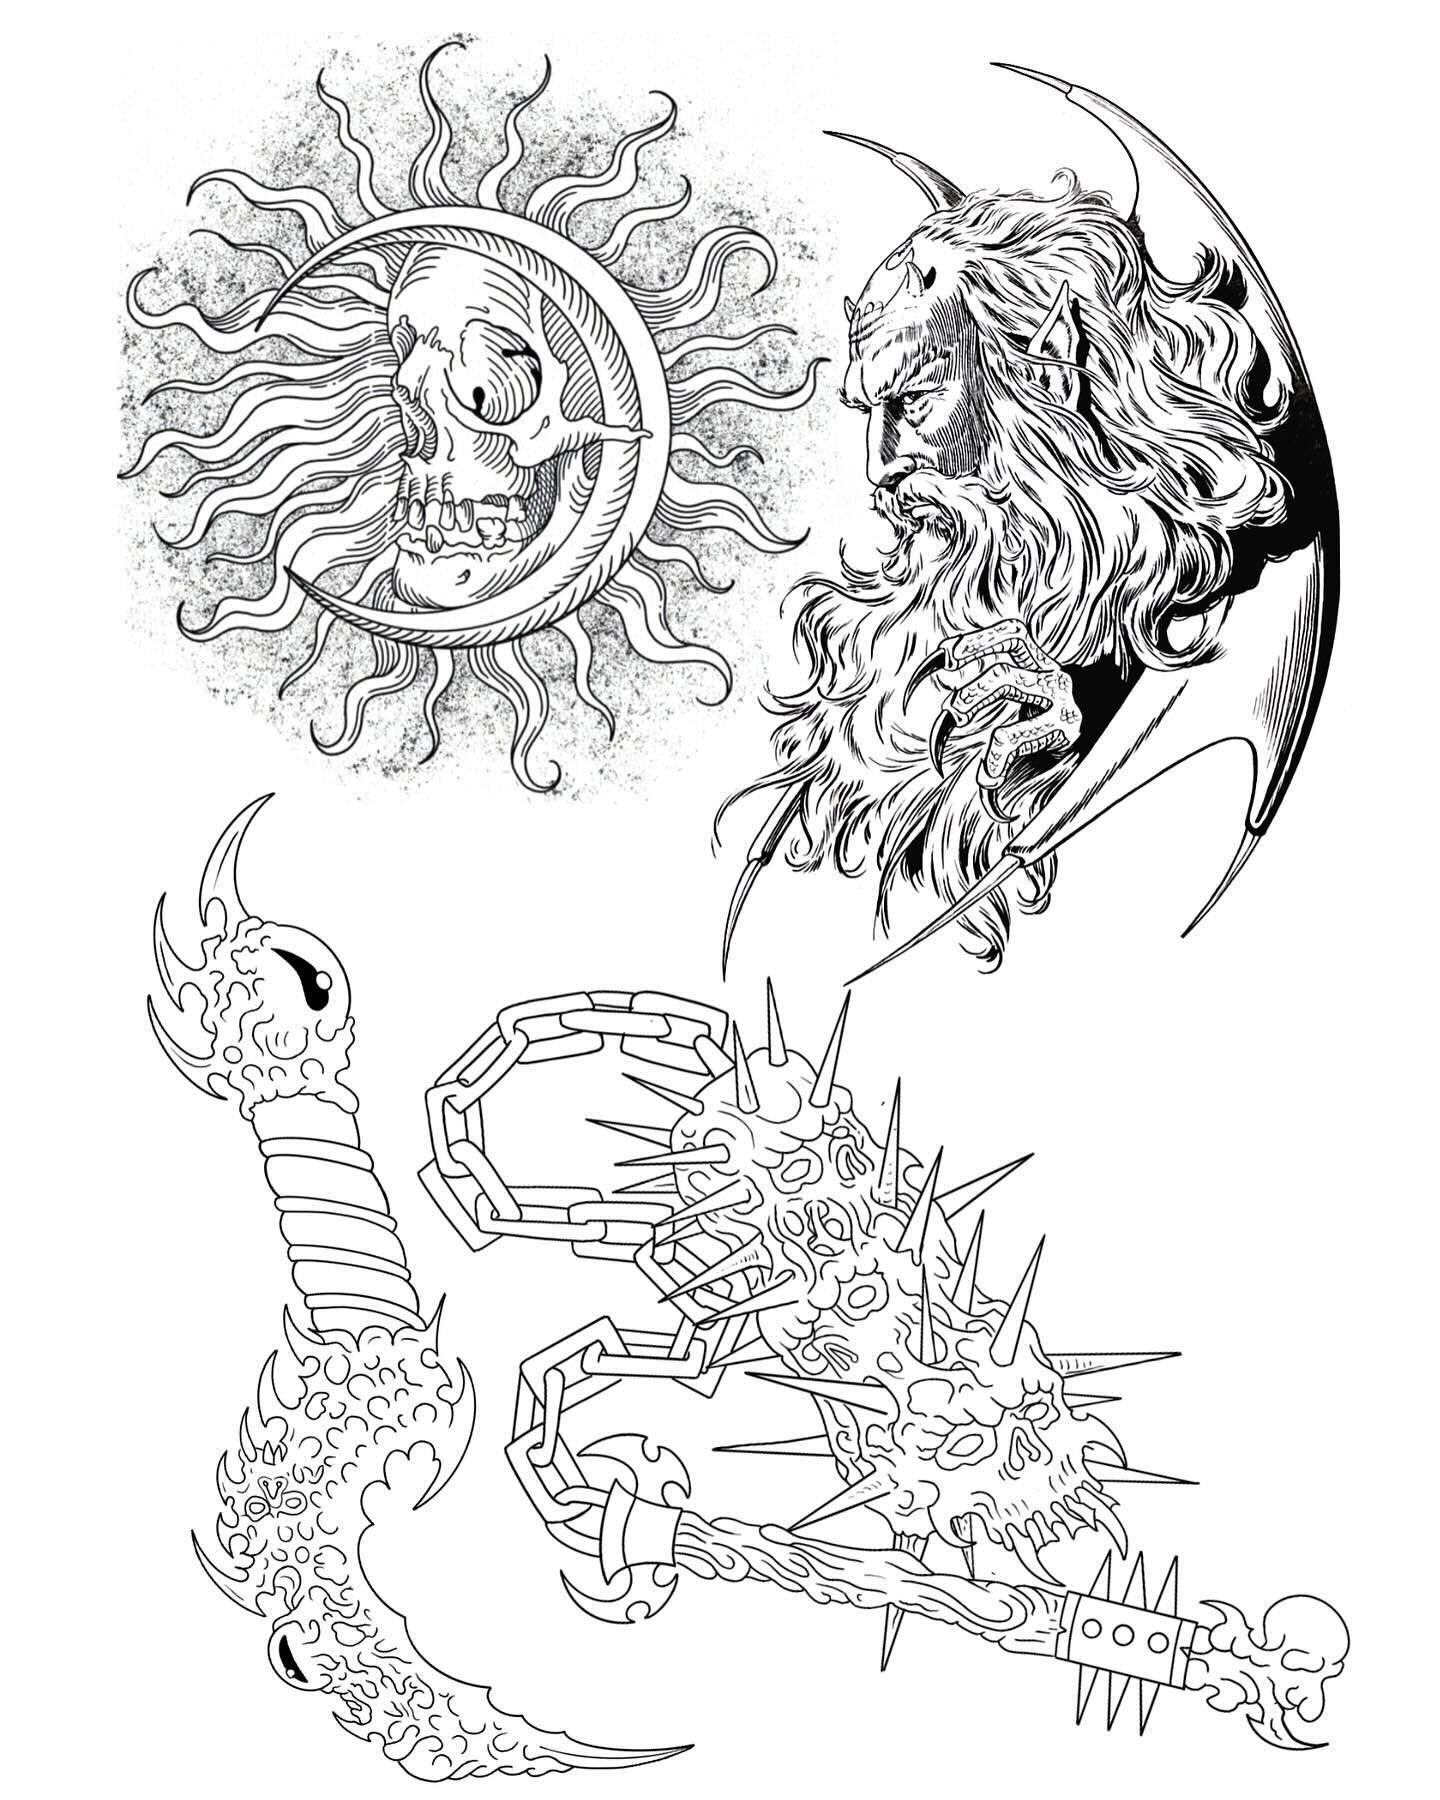 Here are some designs I drew up that I would love to tattoo! If you are interested in any of them just call @inkedarts or DM me for booking details. Thanks for looking!!!